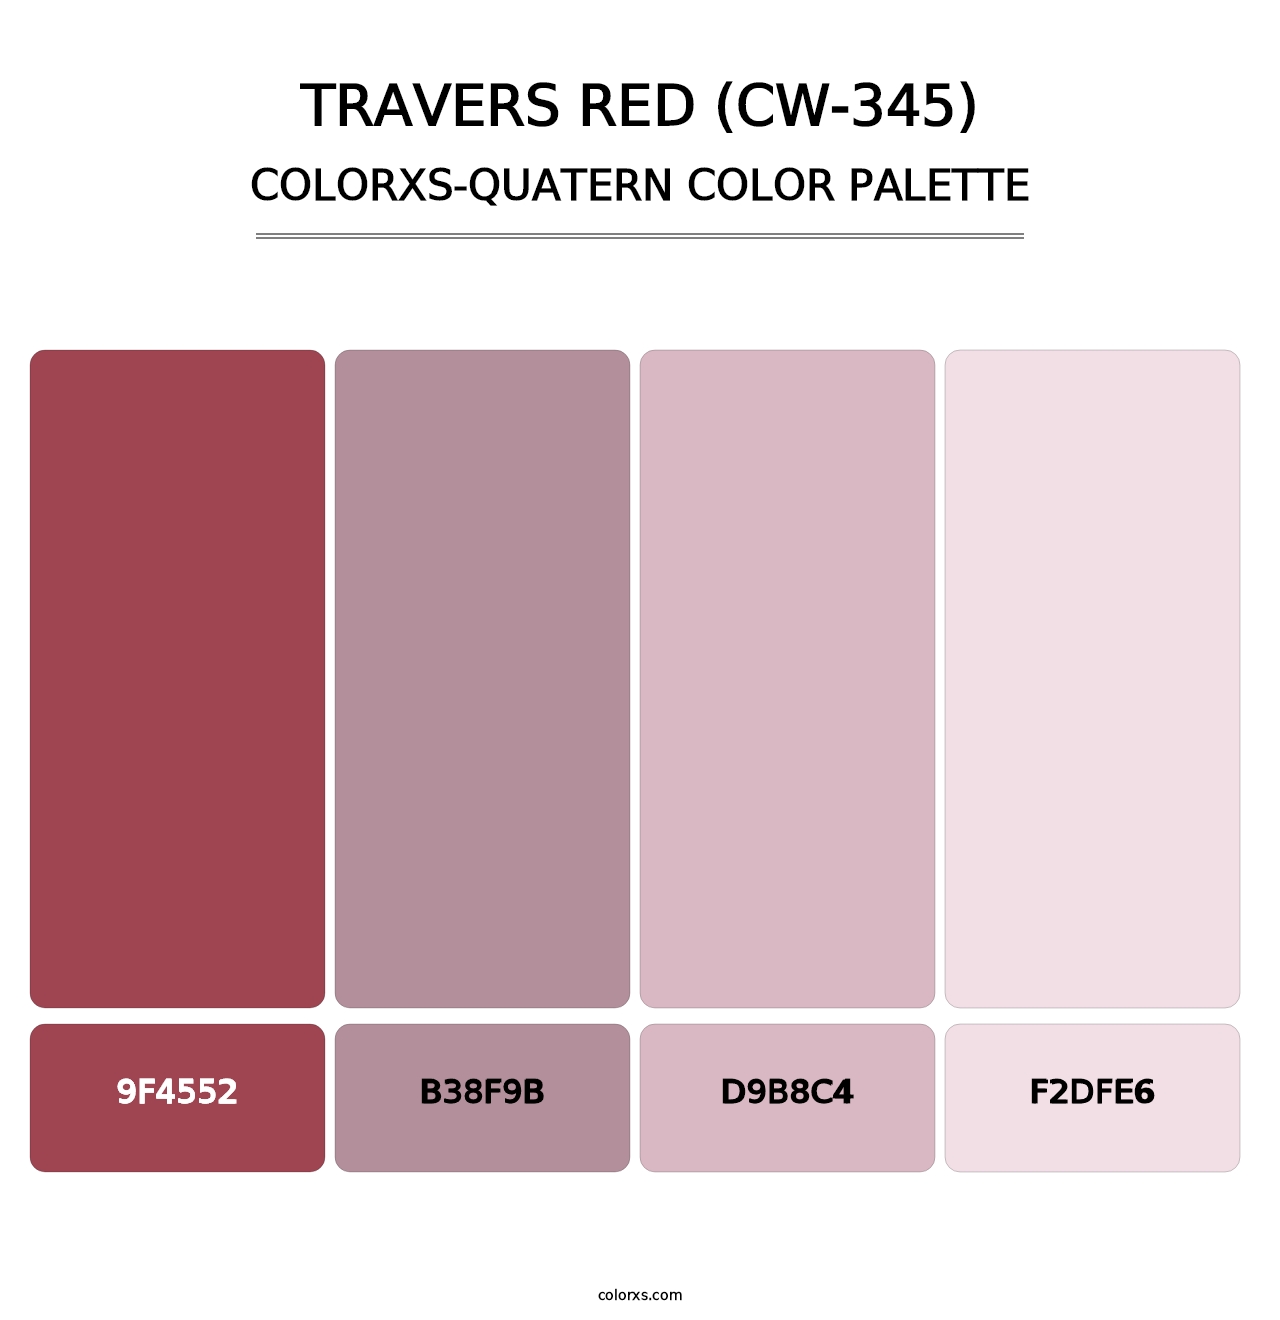 Travers Red (CW-345) - Colorxs Quatern Palette